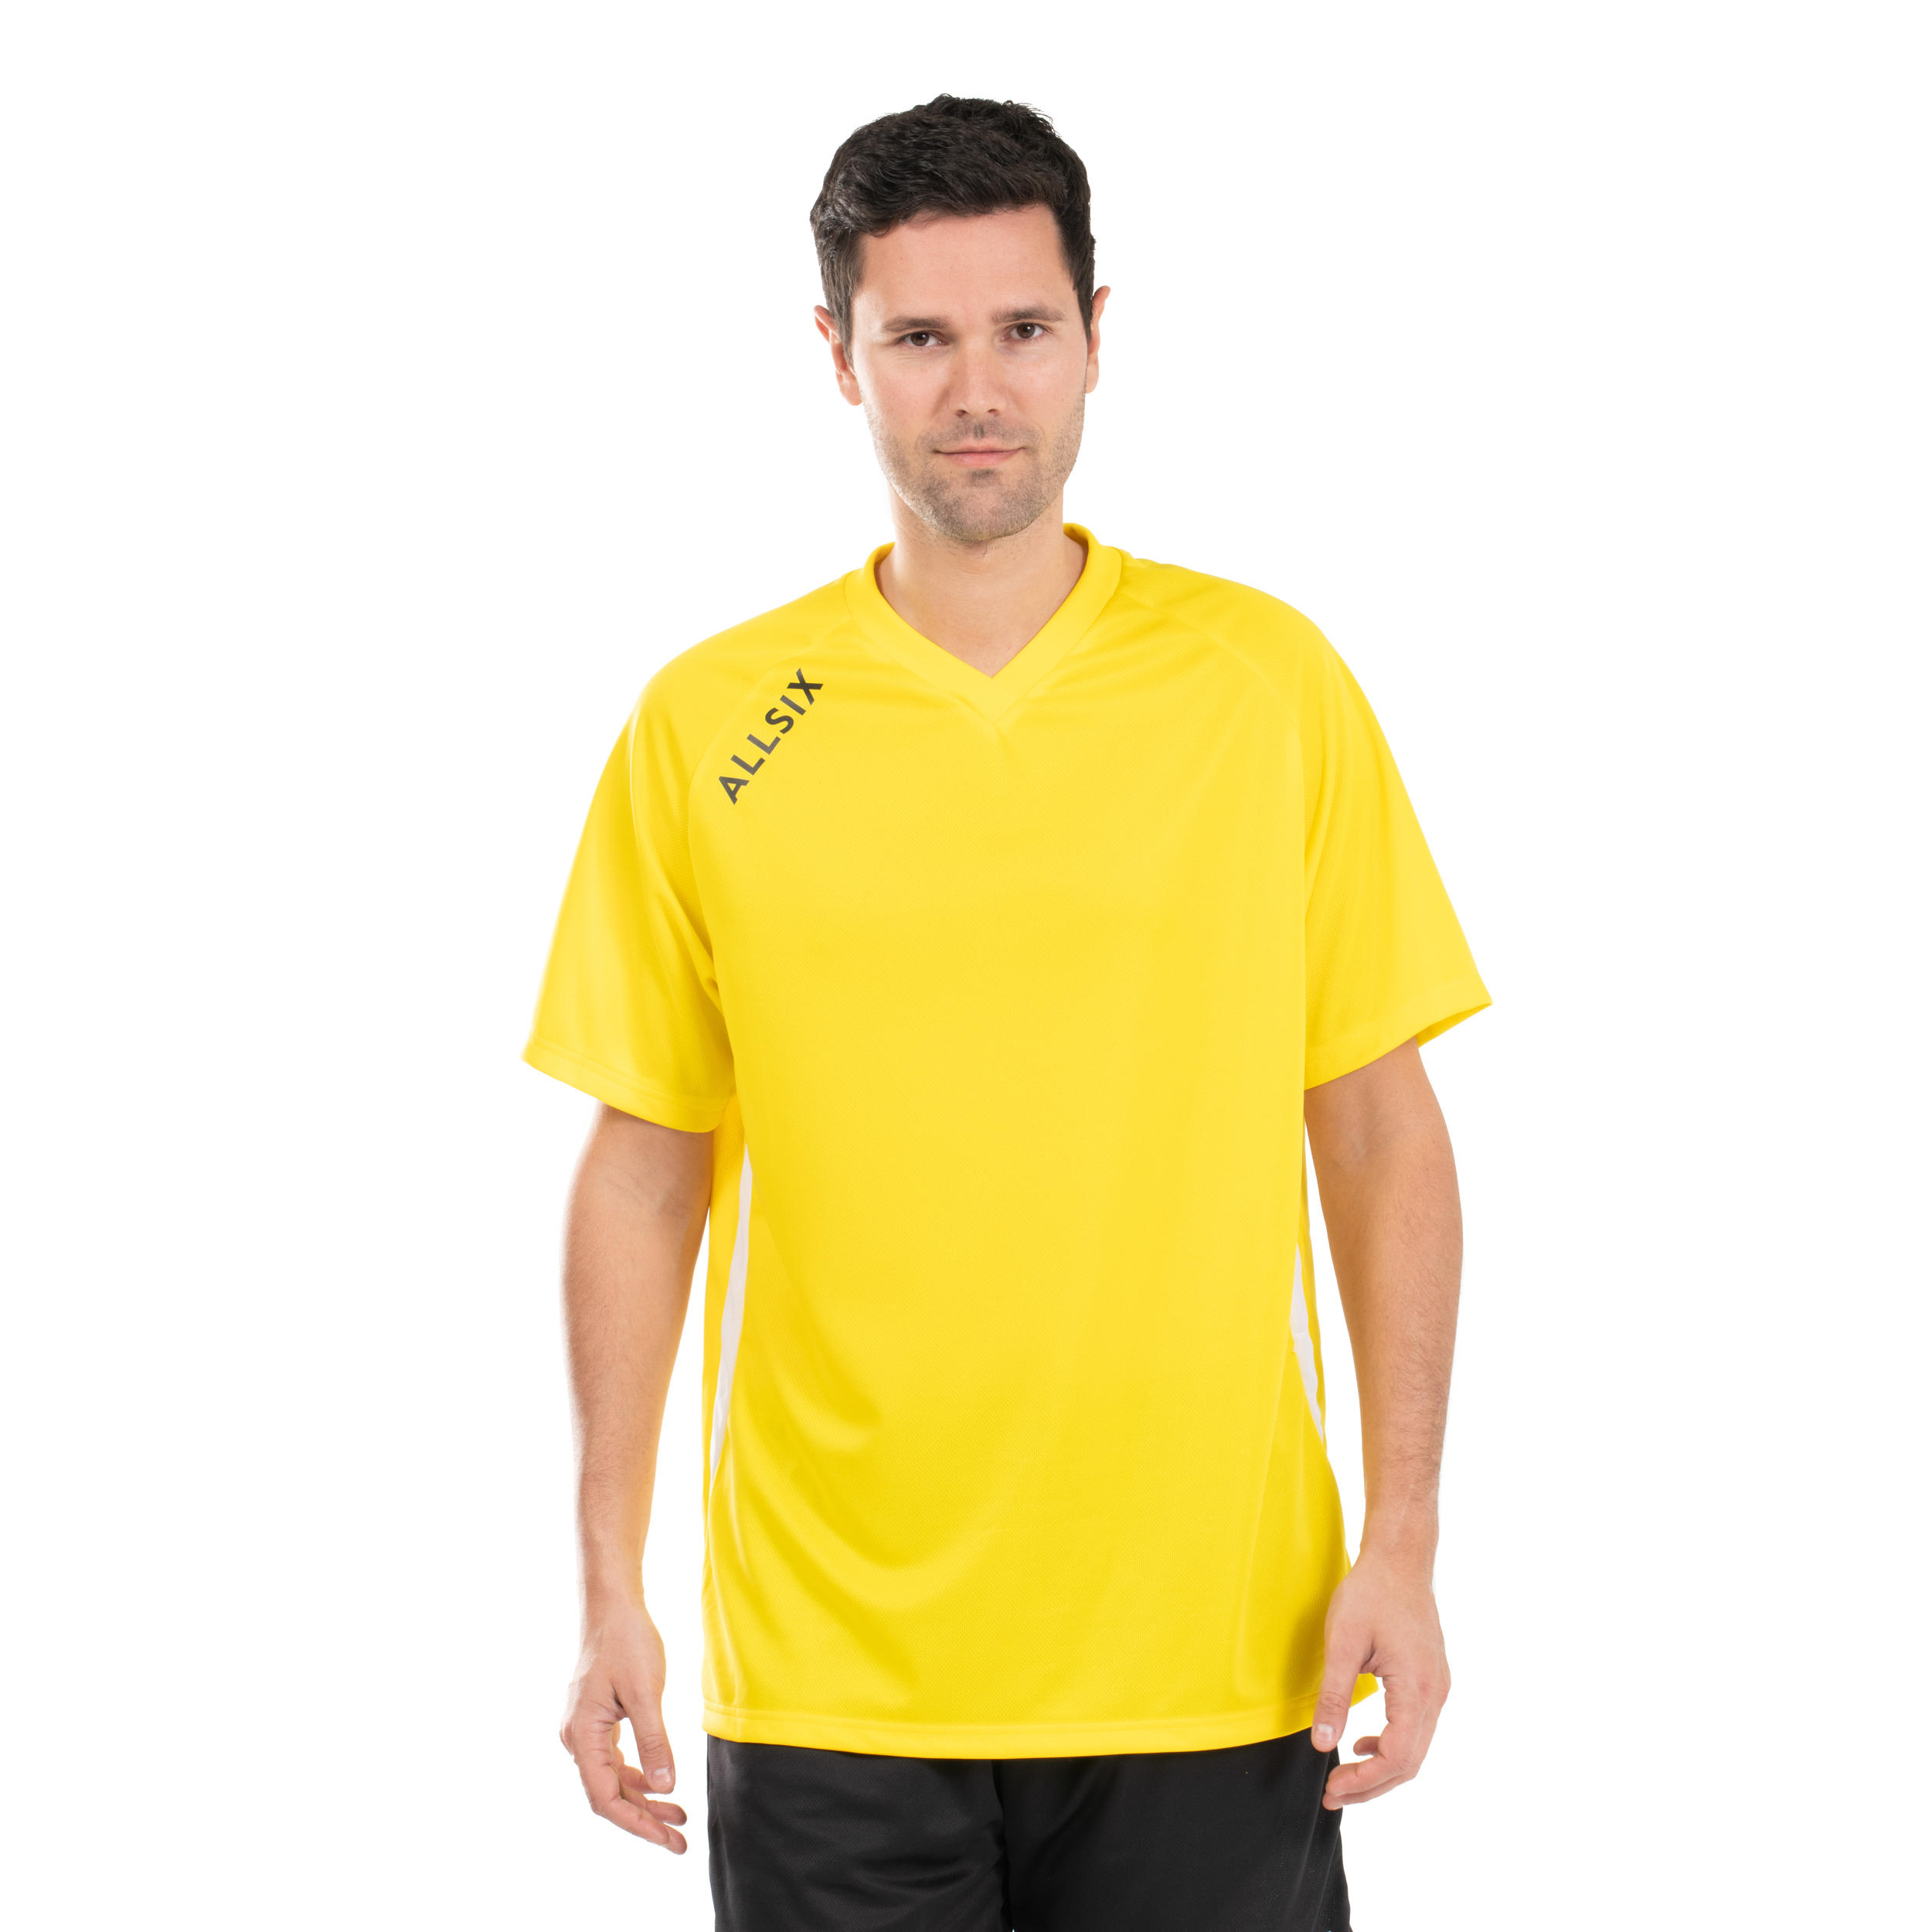 V100 Volleyball Jersey - Yellow 3/8